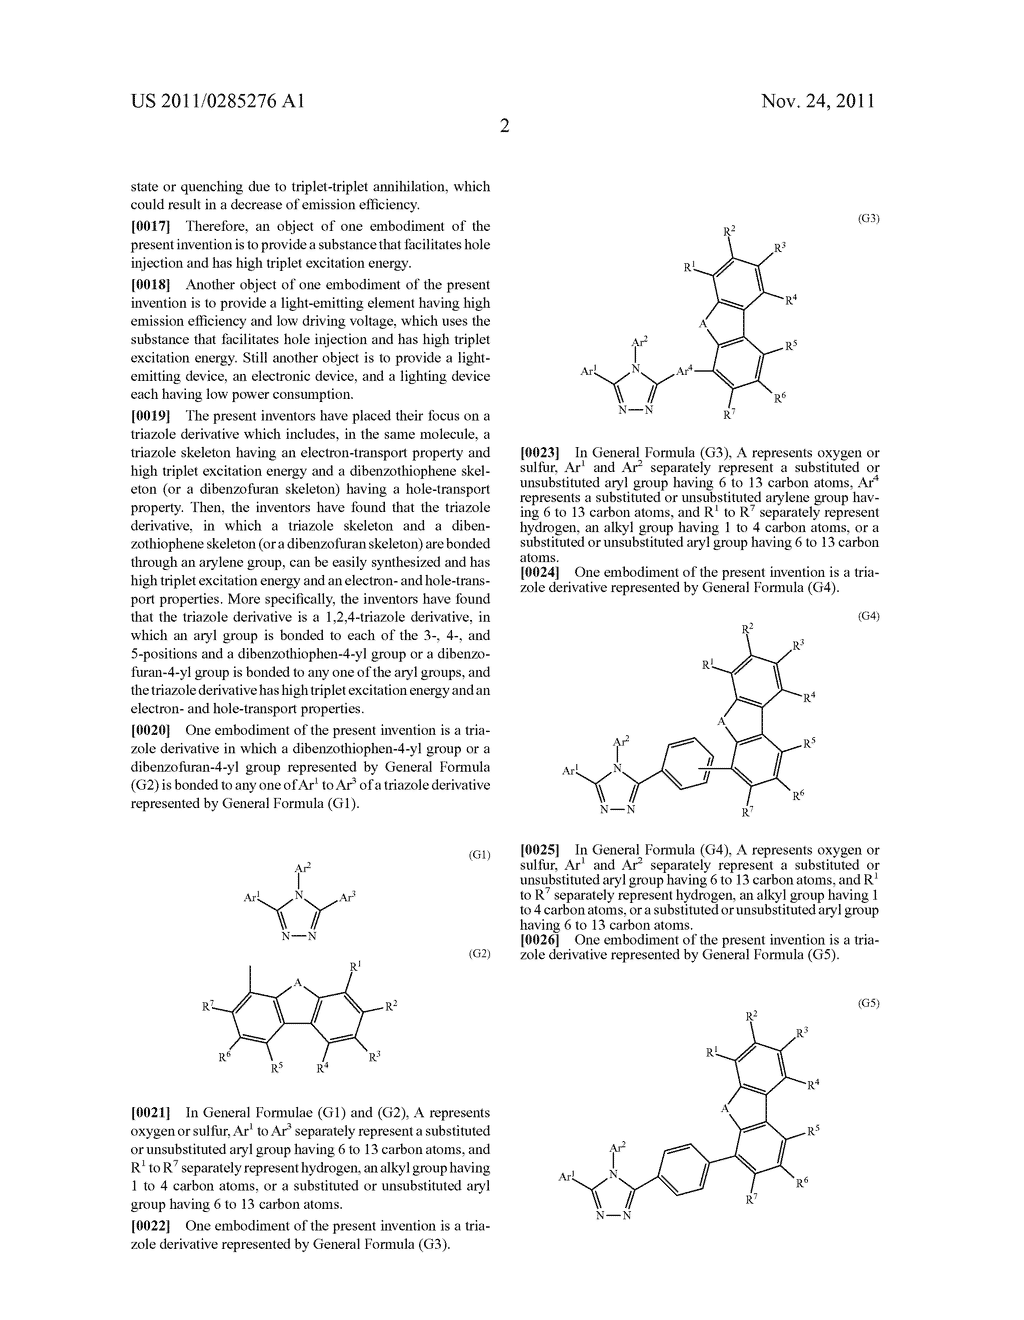 Triazole Derivative, and Light-Emitting Element, Light-Emitting Device,     Electronic Device and Lighting Device Using the Triazole Derivative - diagram, schematic, and image 20